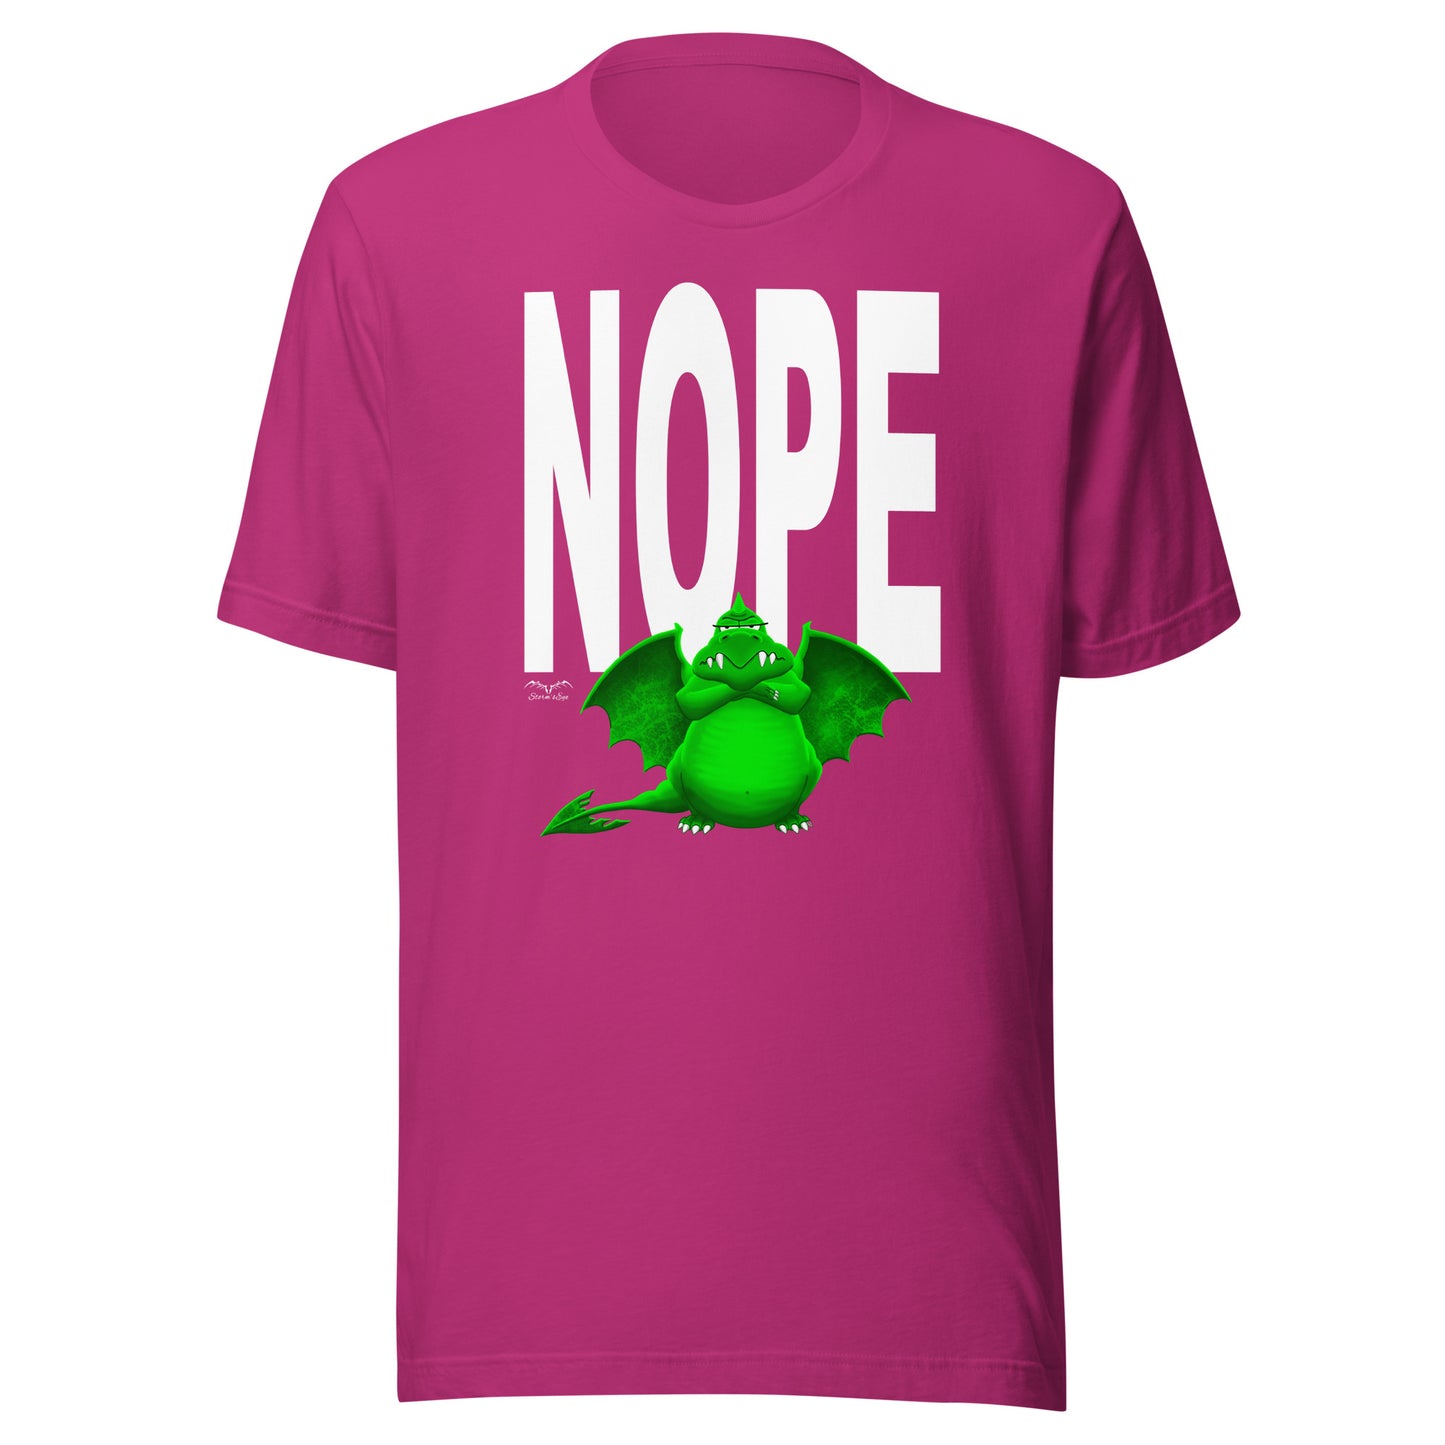 nope dragon bouncer t-shirt, bright pink, by Stormseye Design